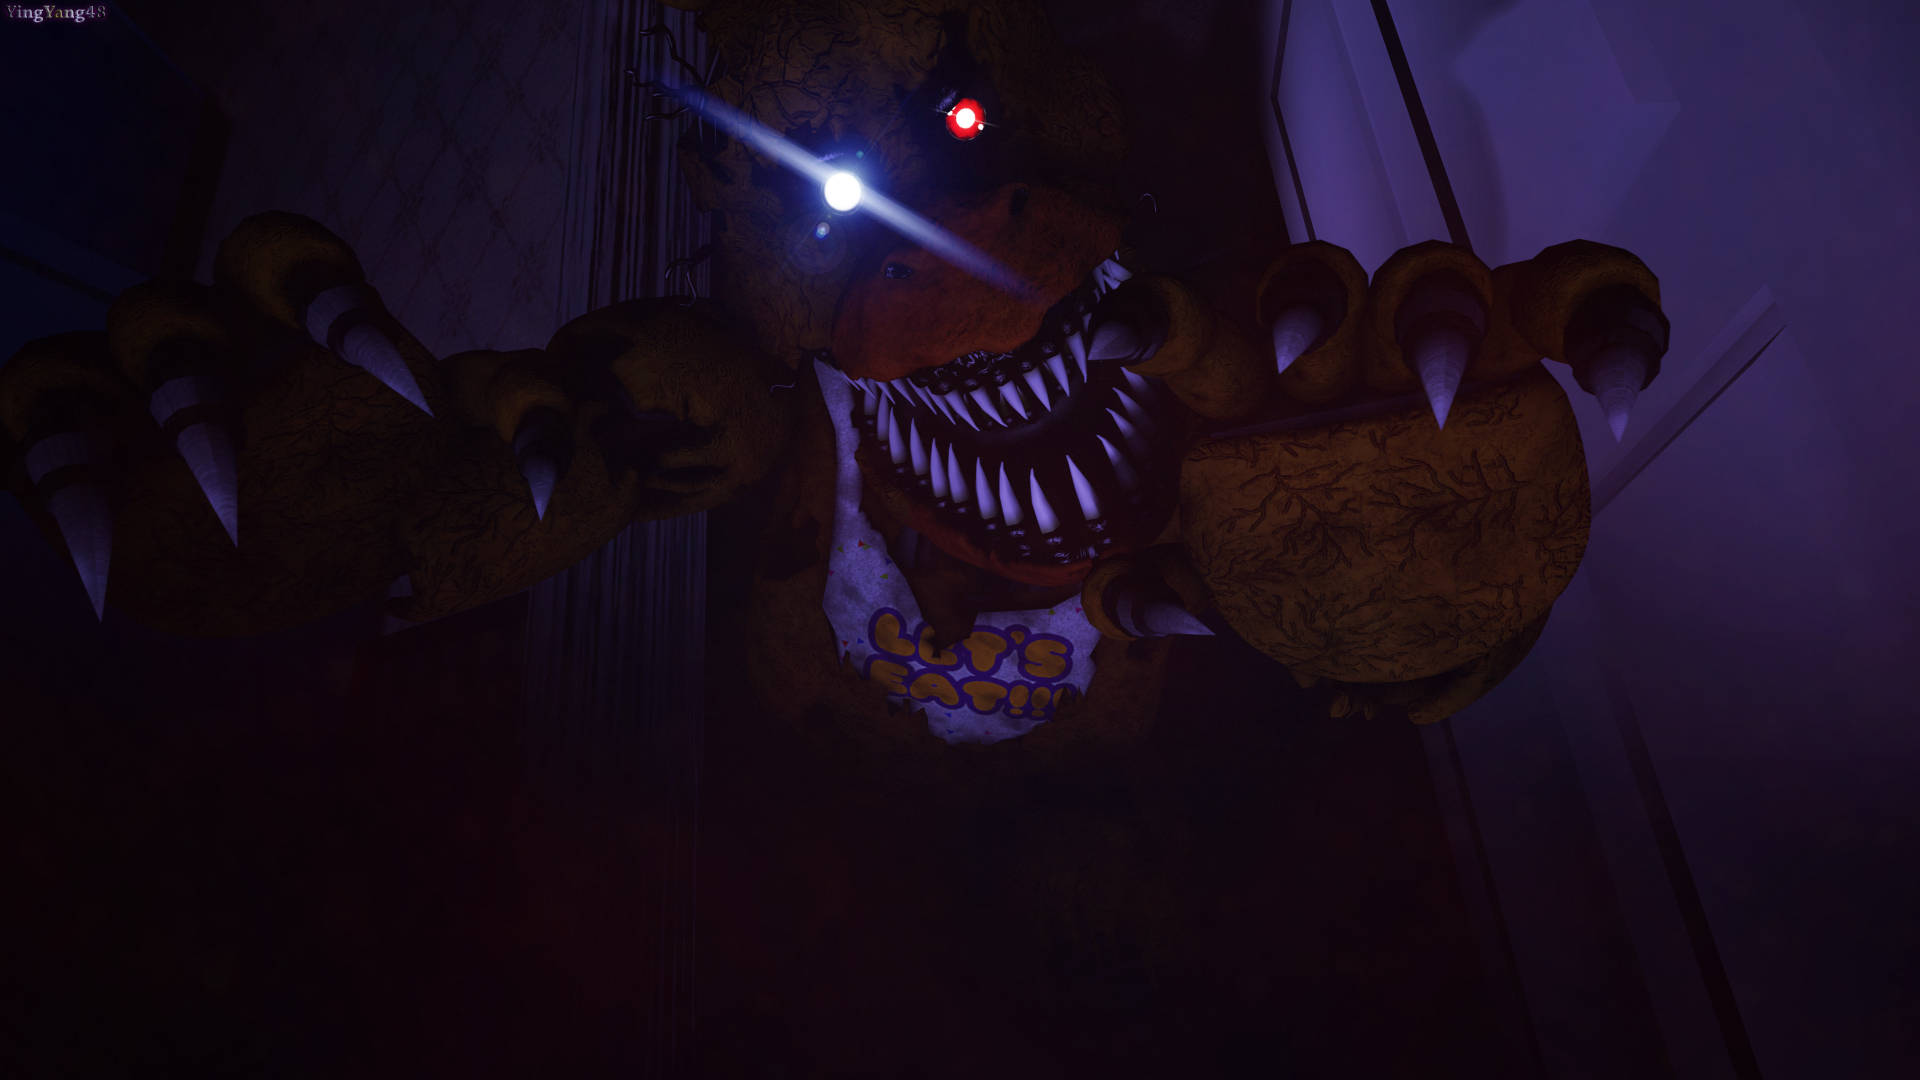 Caption: Sinister Stare Of Nightmare Freddy